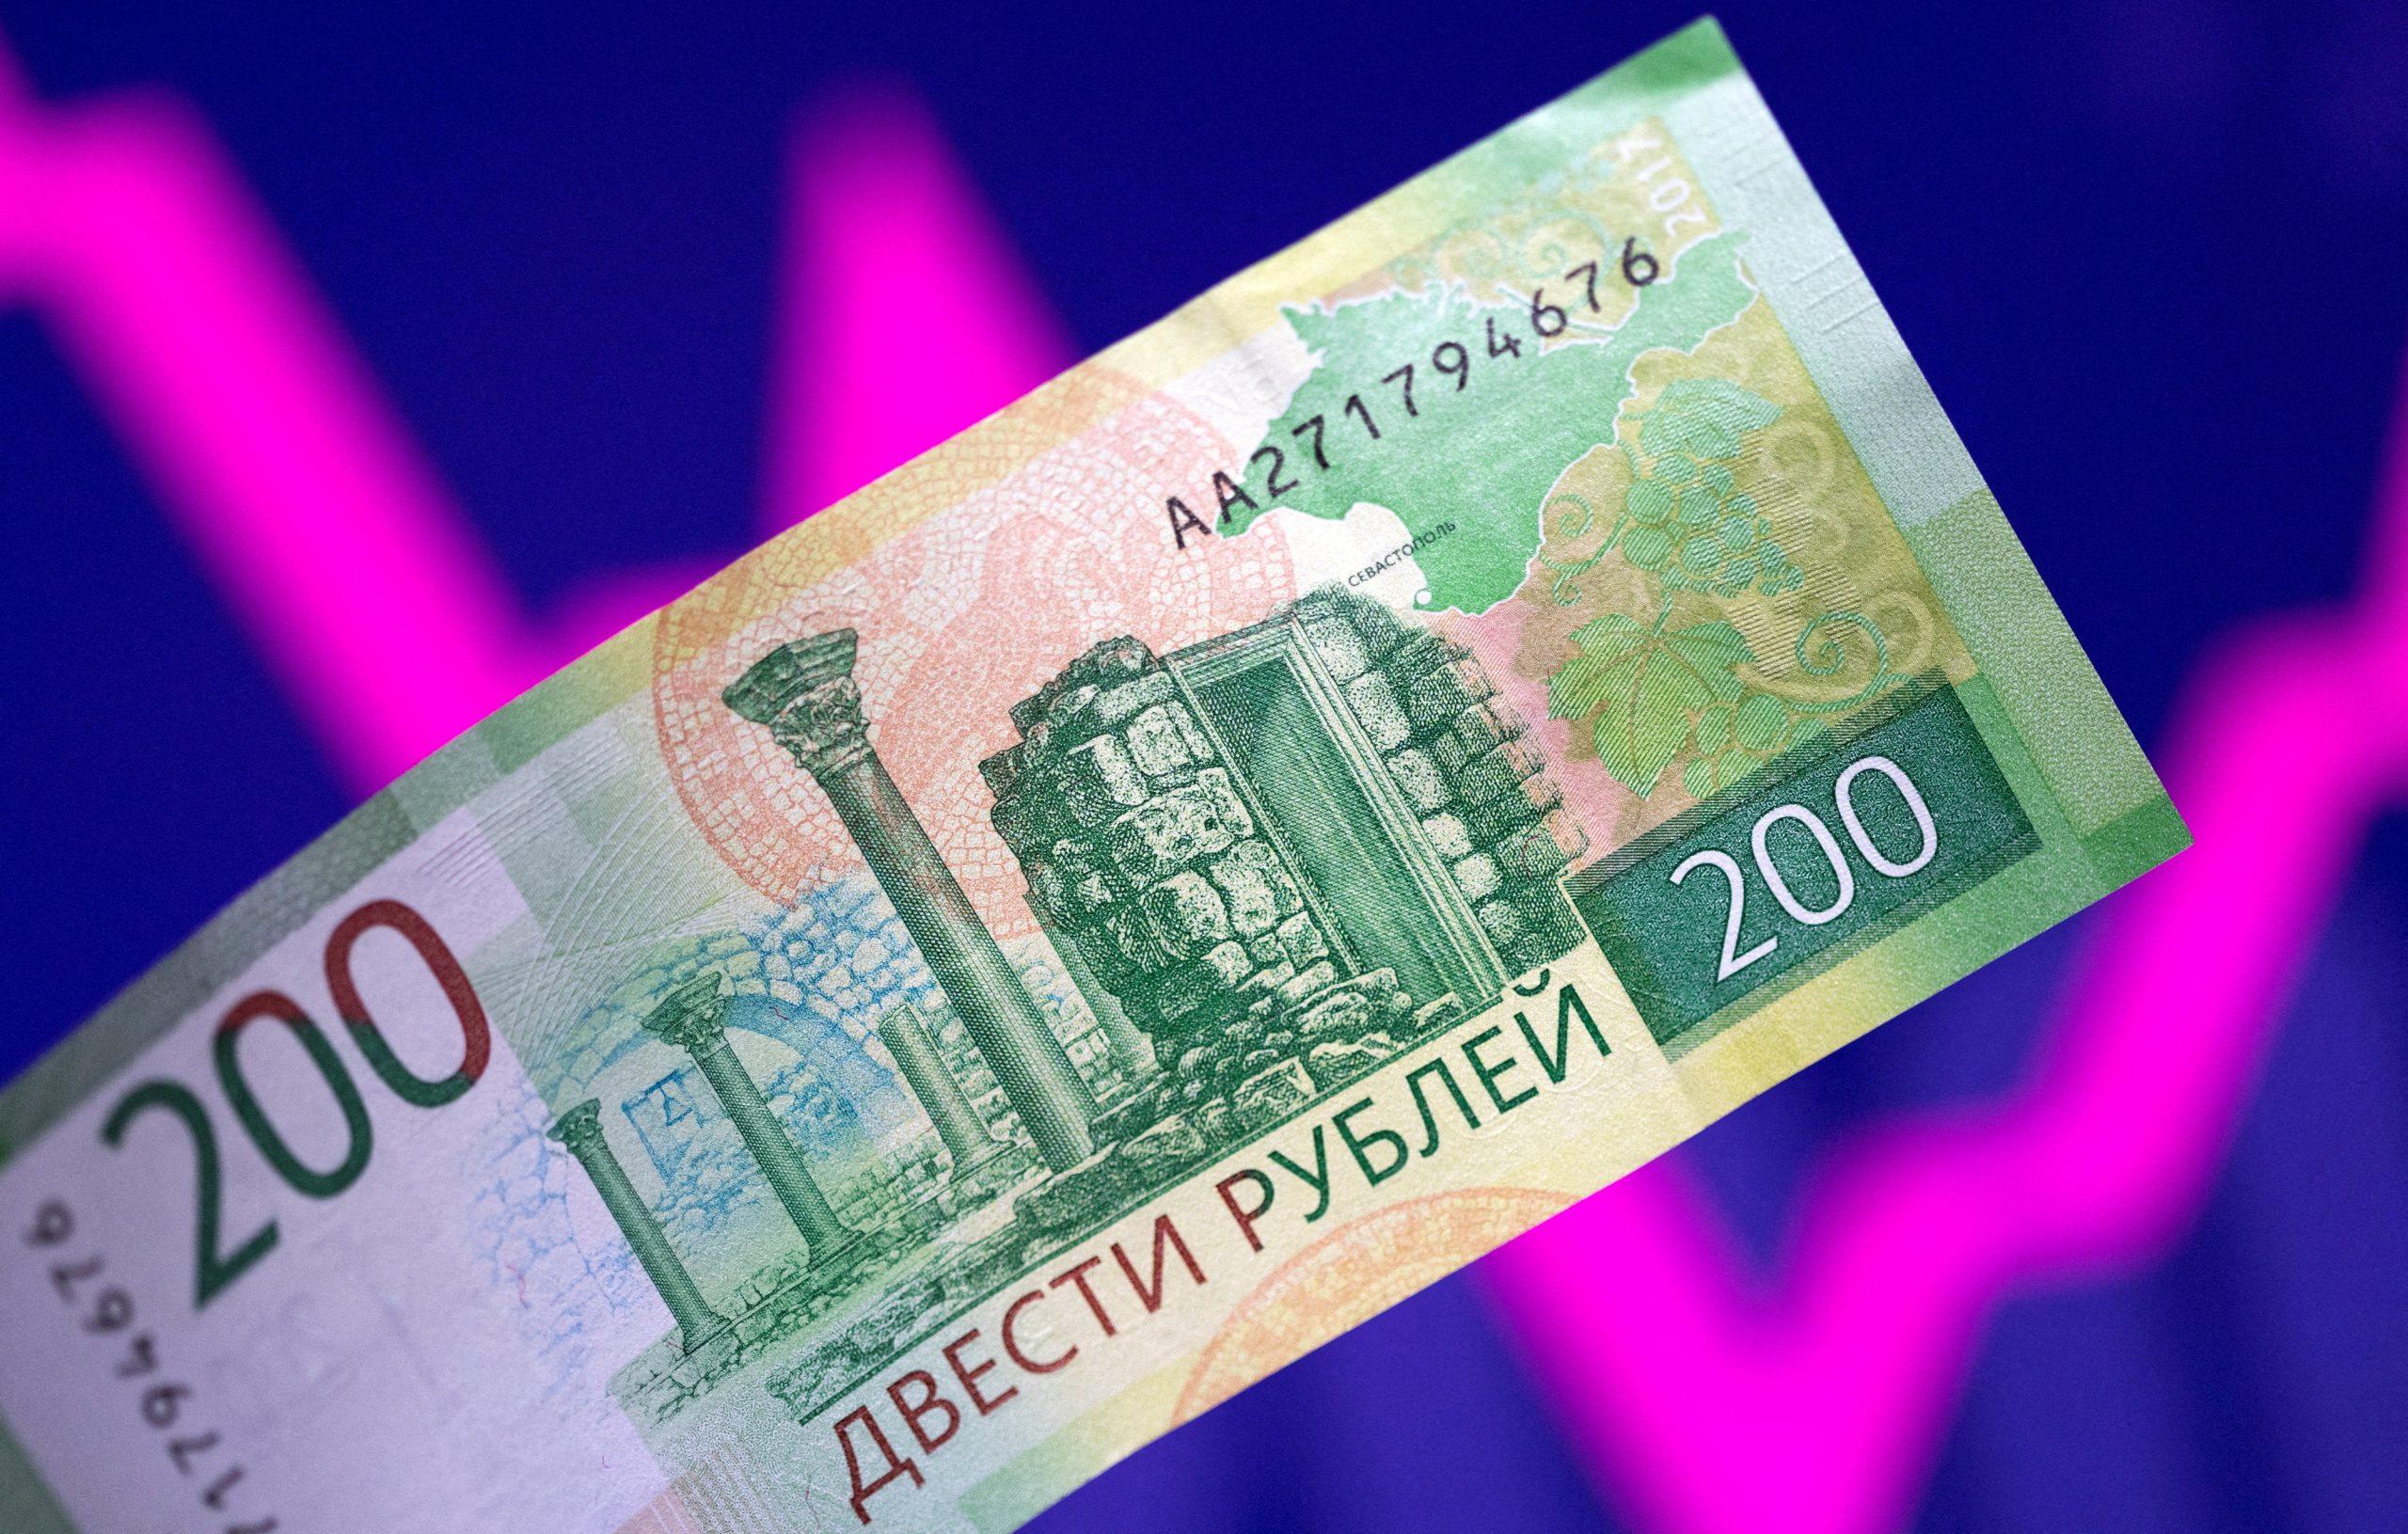 Russia’s official currency is the Russian ruble